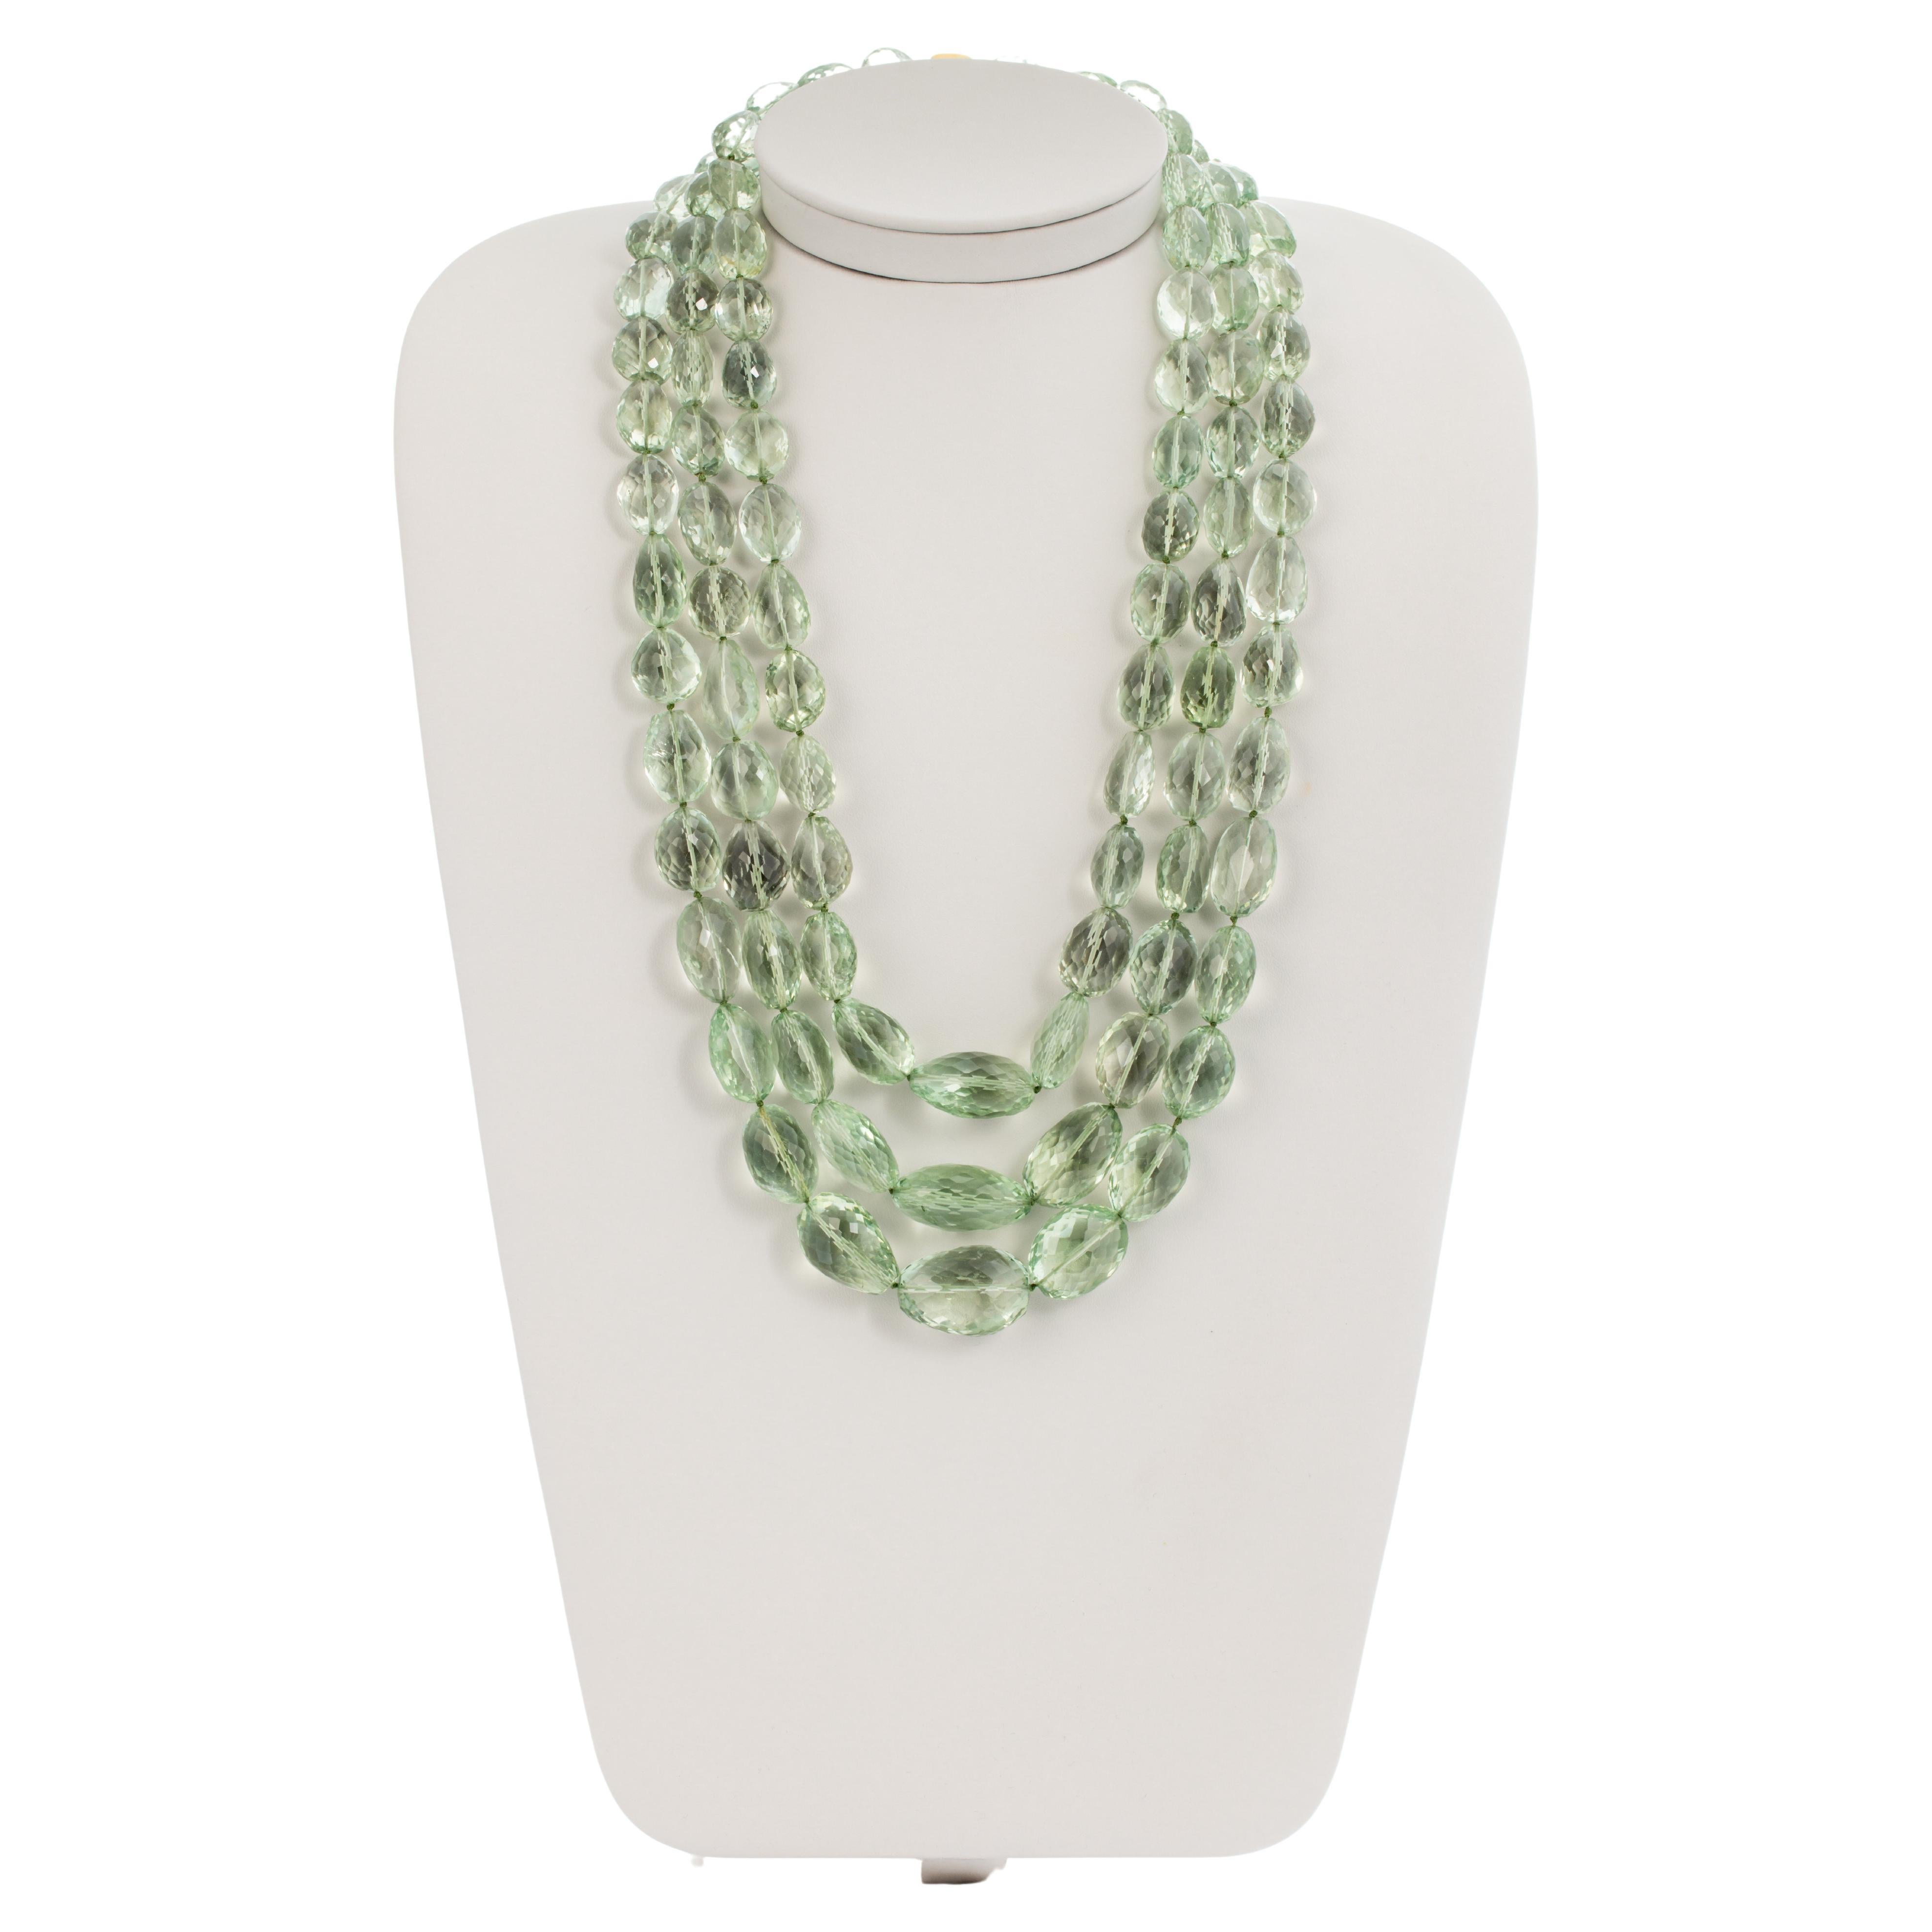 "Costis" Triple-Strand Necklace with Multi Green Amethyst Beads tot. 1900 cts  